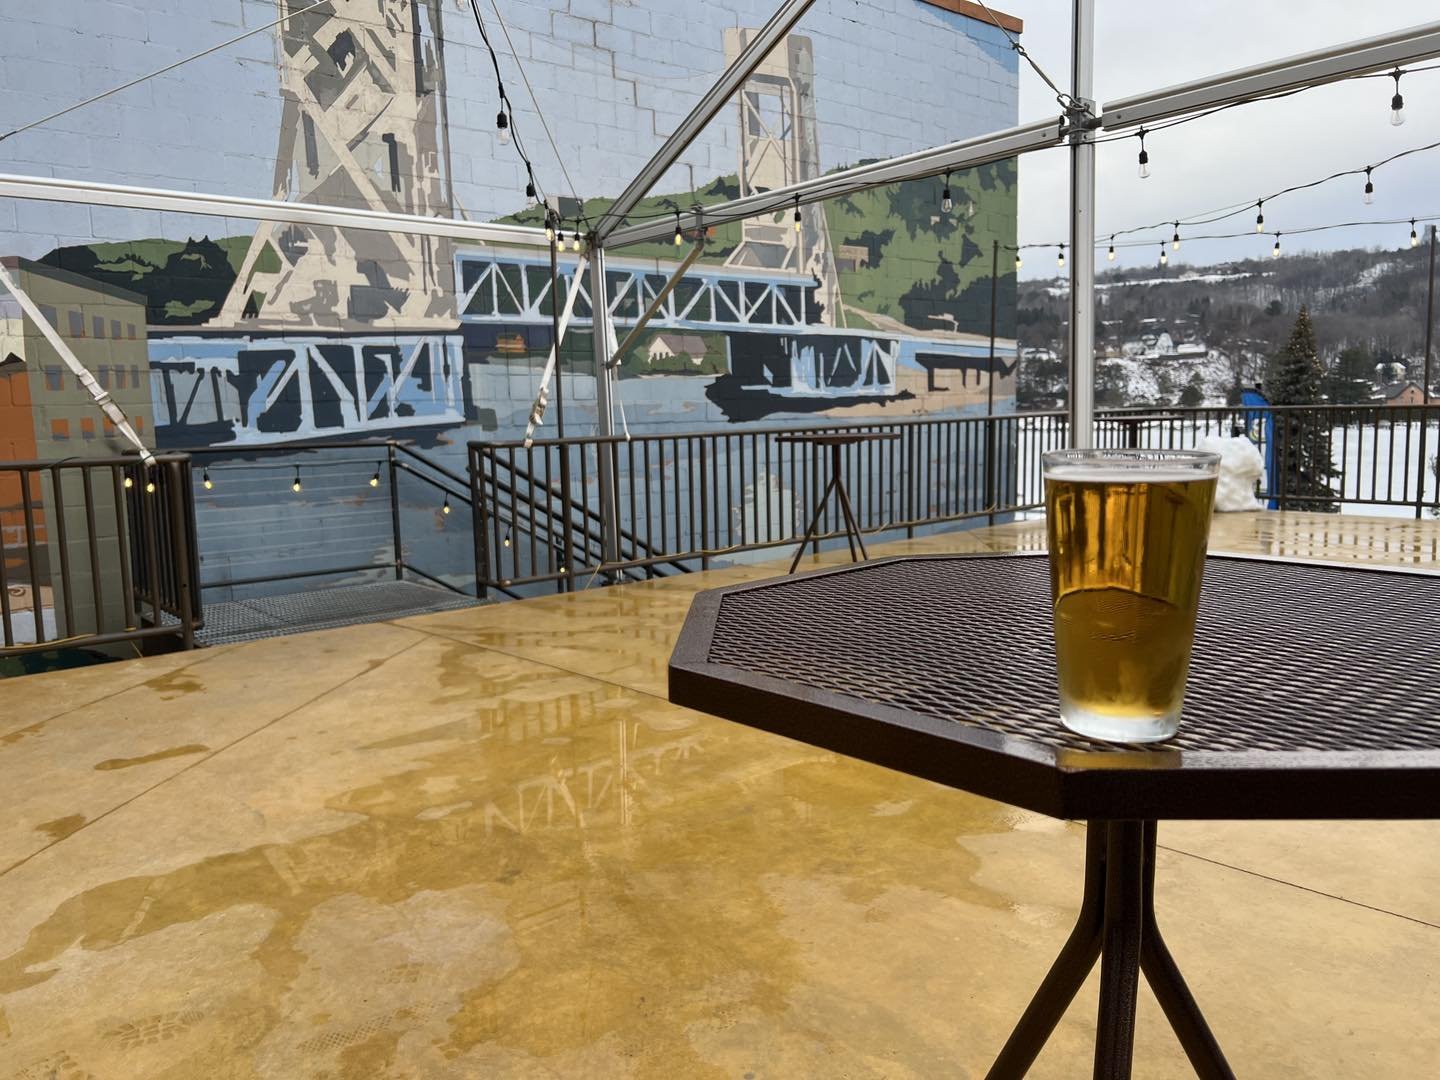 Come join us for a Carnival first here.  Our deck is open for the weekend. Enjoy a pint and imagine you are watching the ice freeze into magical statues.